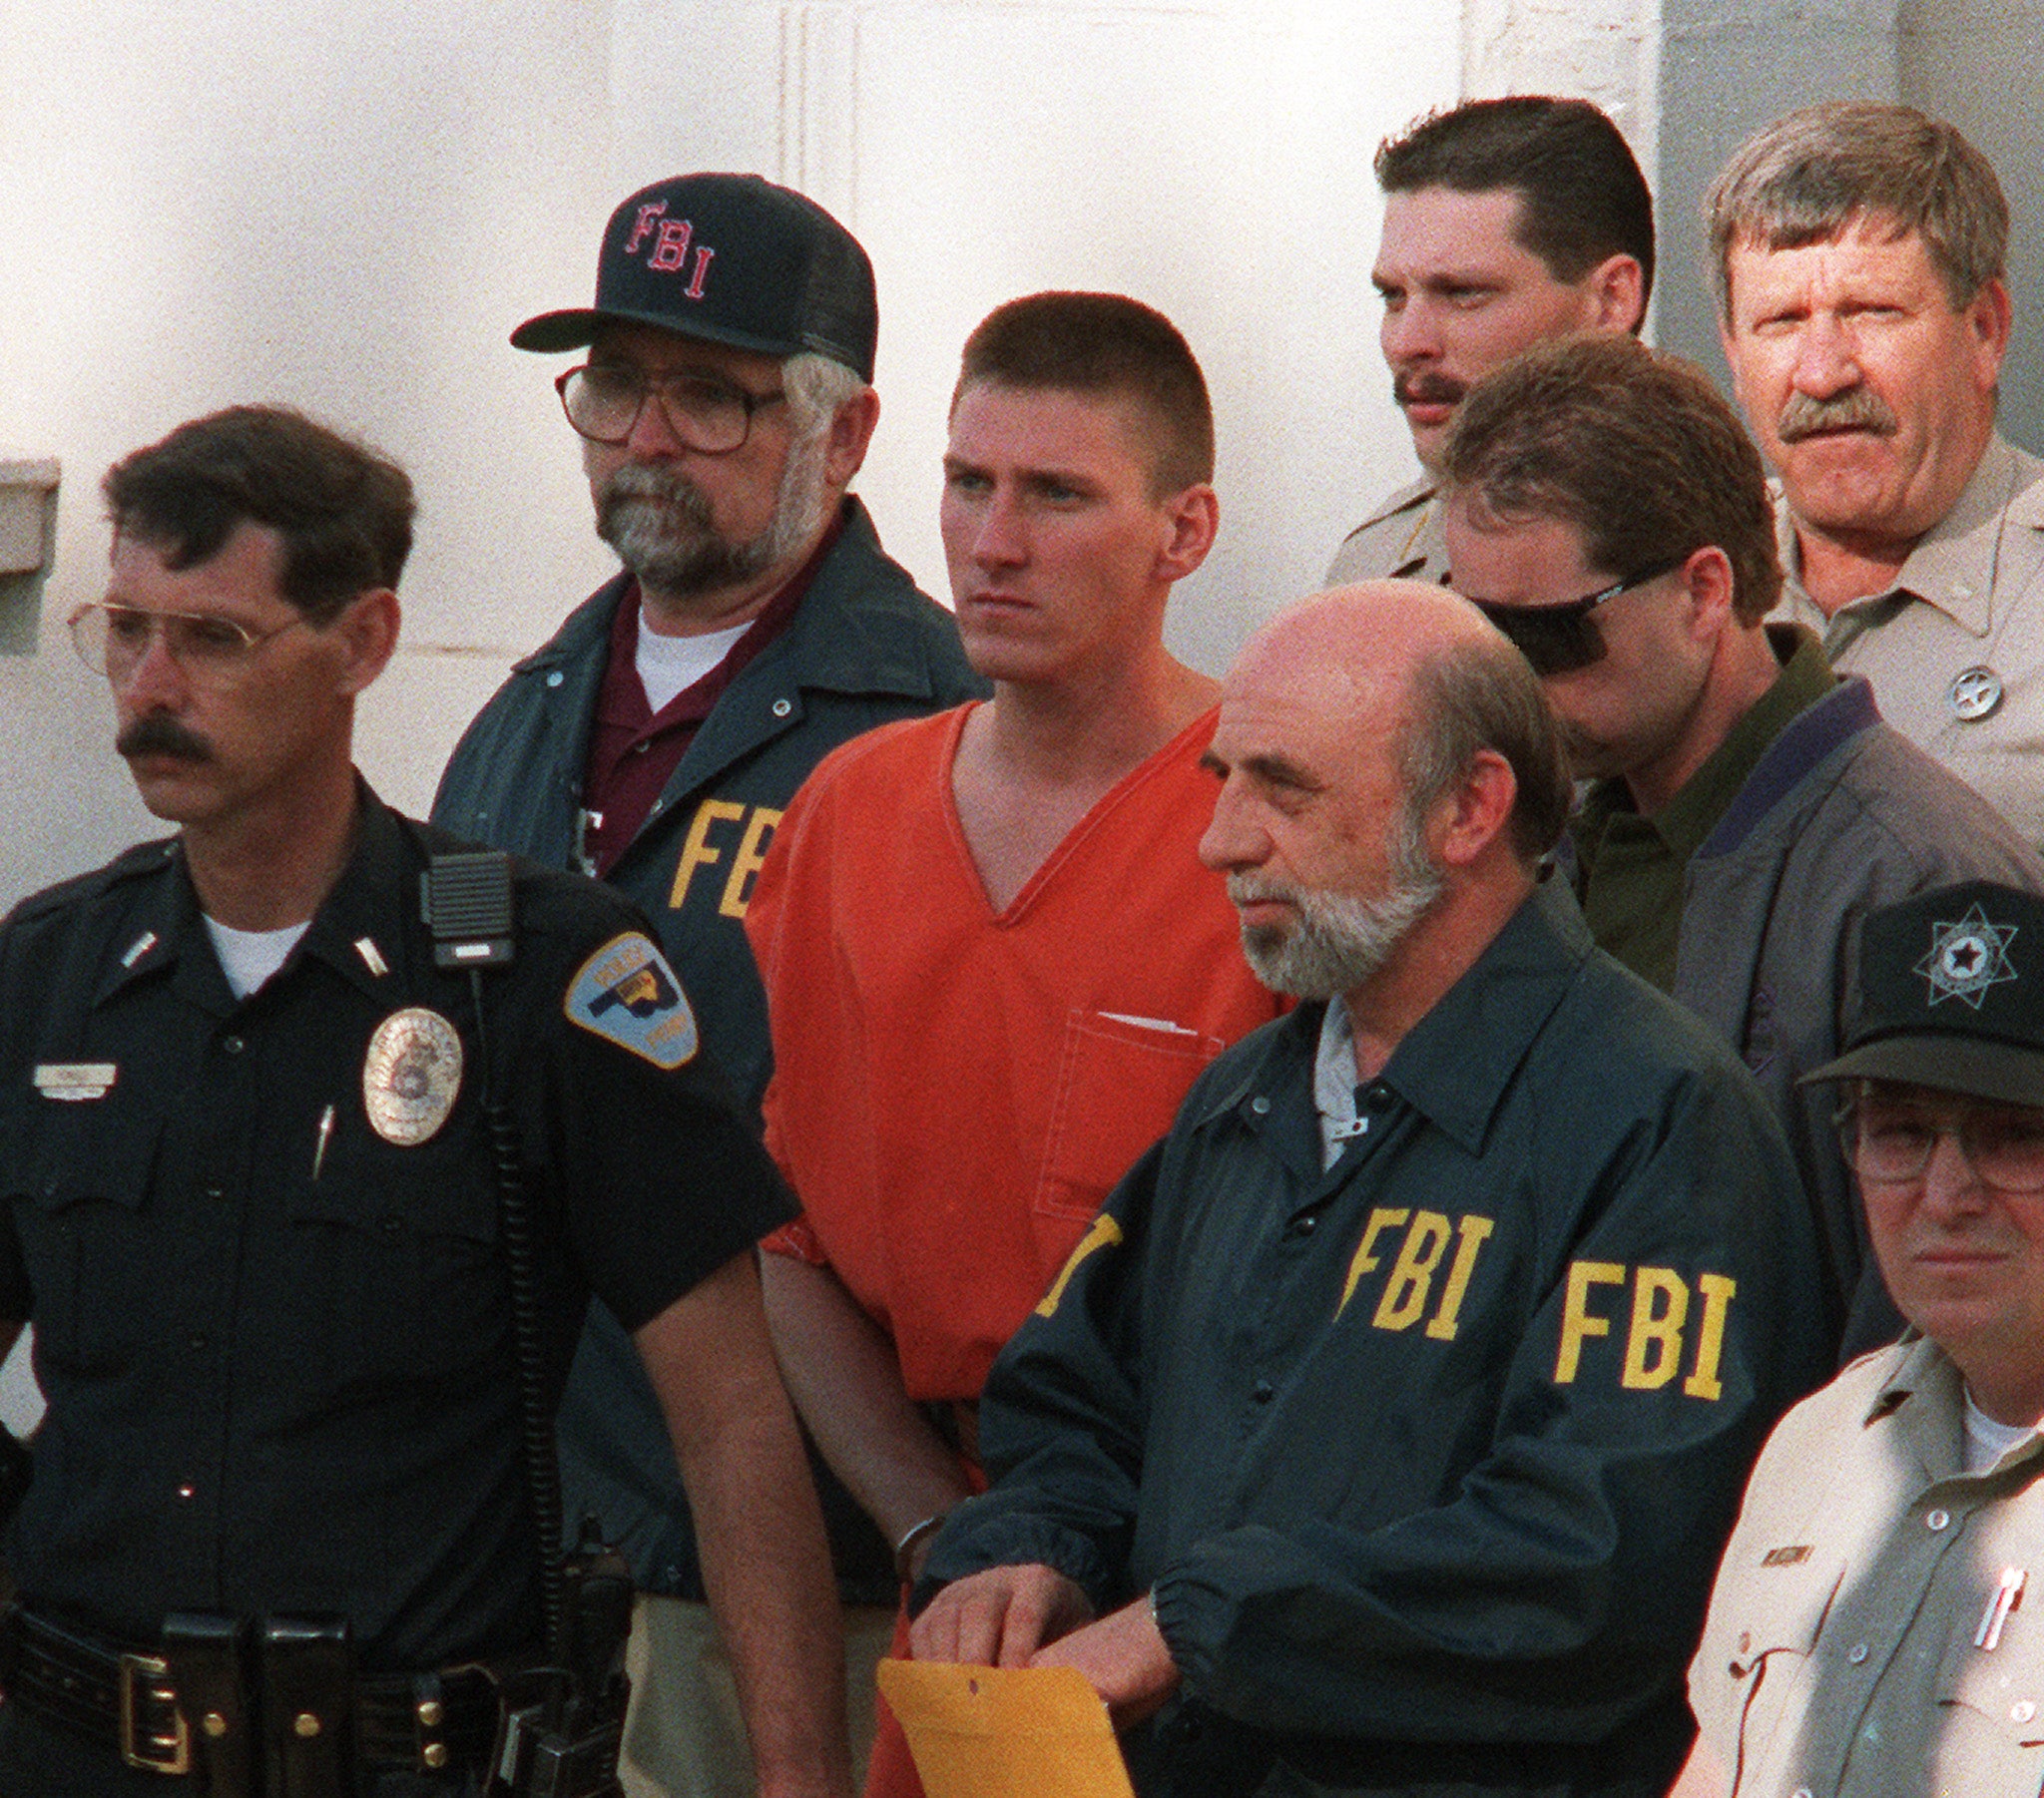 Timothy McVeigh was found guilty of the 1995 Oklahoma City Bombing and sentenced to death